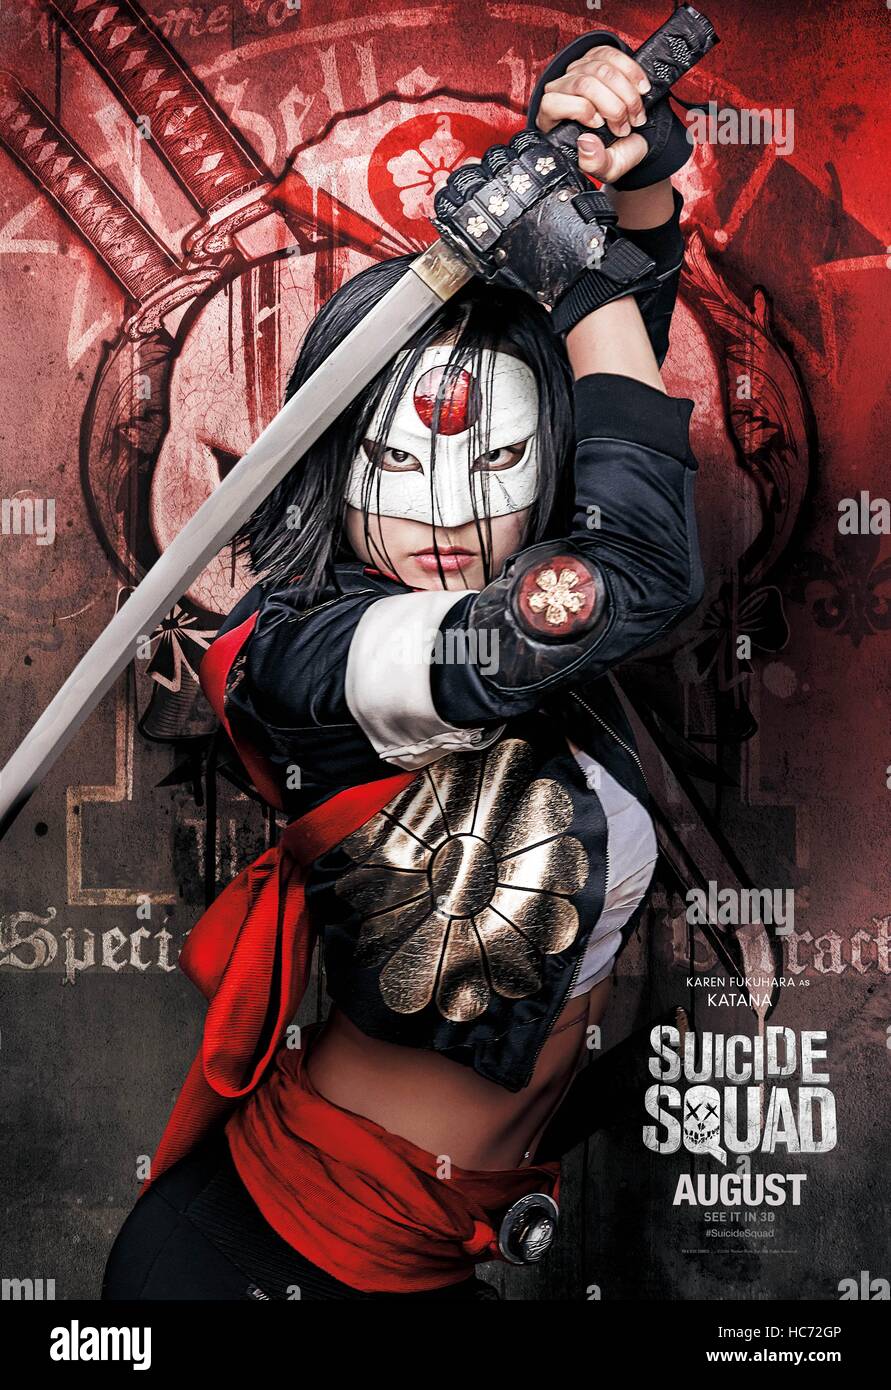 RELEASE DATE: August 5, 2016 TITLE: Suicide Squad STUDIO: Atlas Entertainment DIRECTOR: David Ayer PLOT: A secret government agency recruits imprisoned supervillains to execute dangerous black ops missions in exchange for clemency STARRING: Karen Fukuhara as Katana poster (Credit Image: c Atlas Entertainment/Entertainment Pictures/) Stock Photo